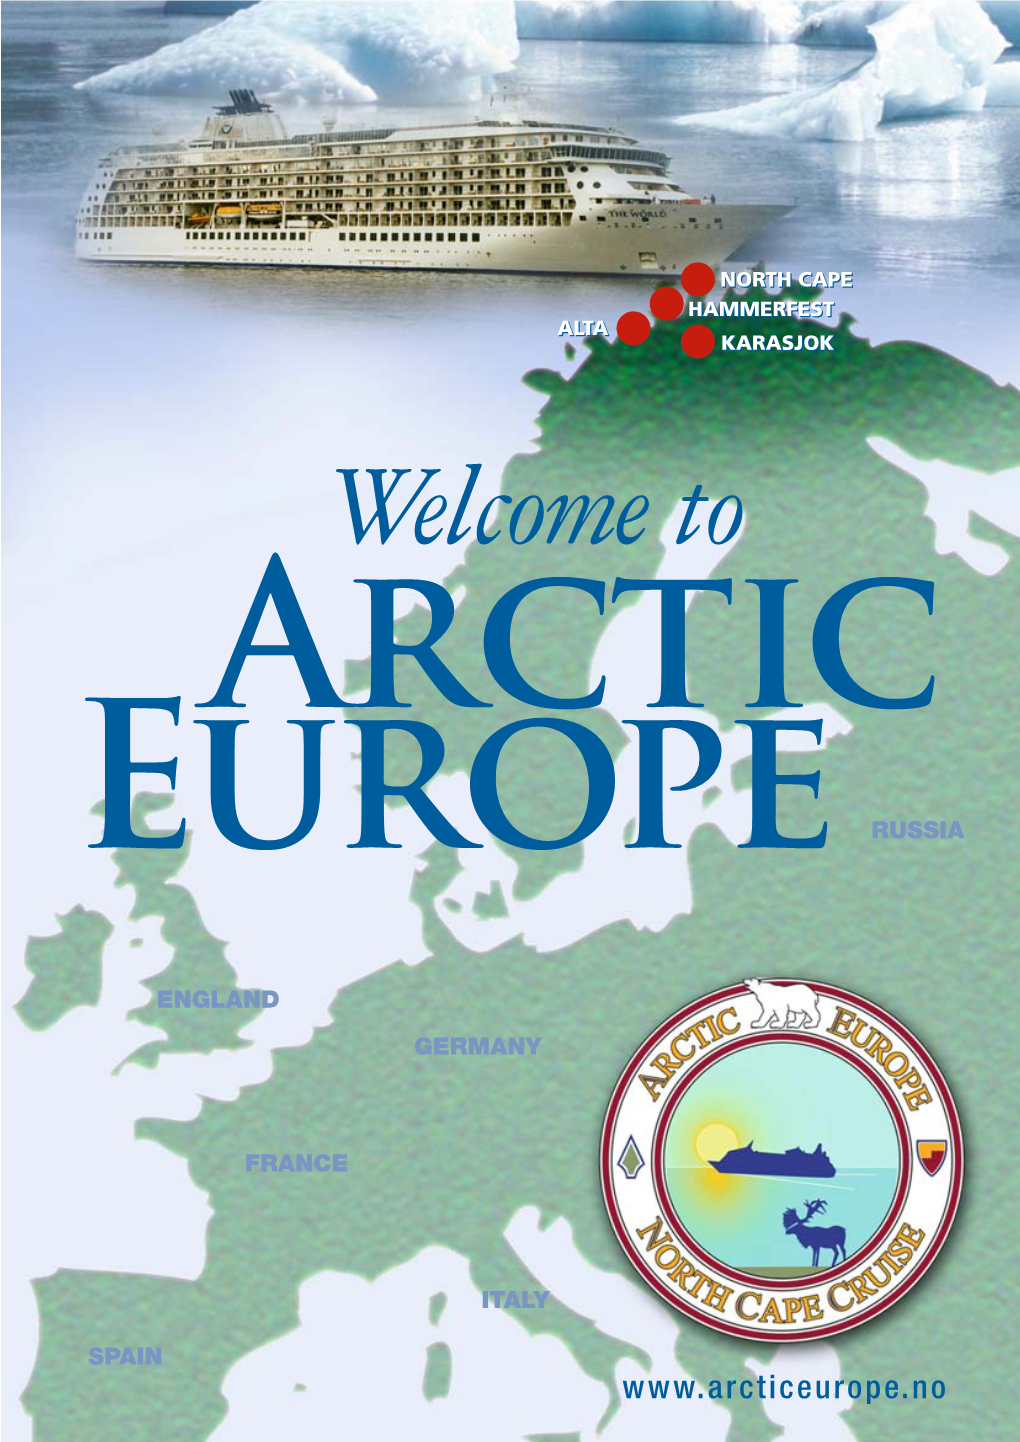 Welcome to Arctic Europe – North Cape Cruise!